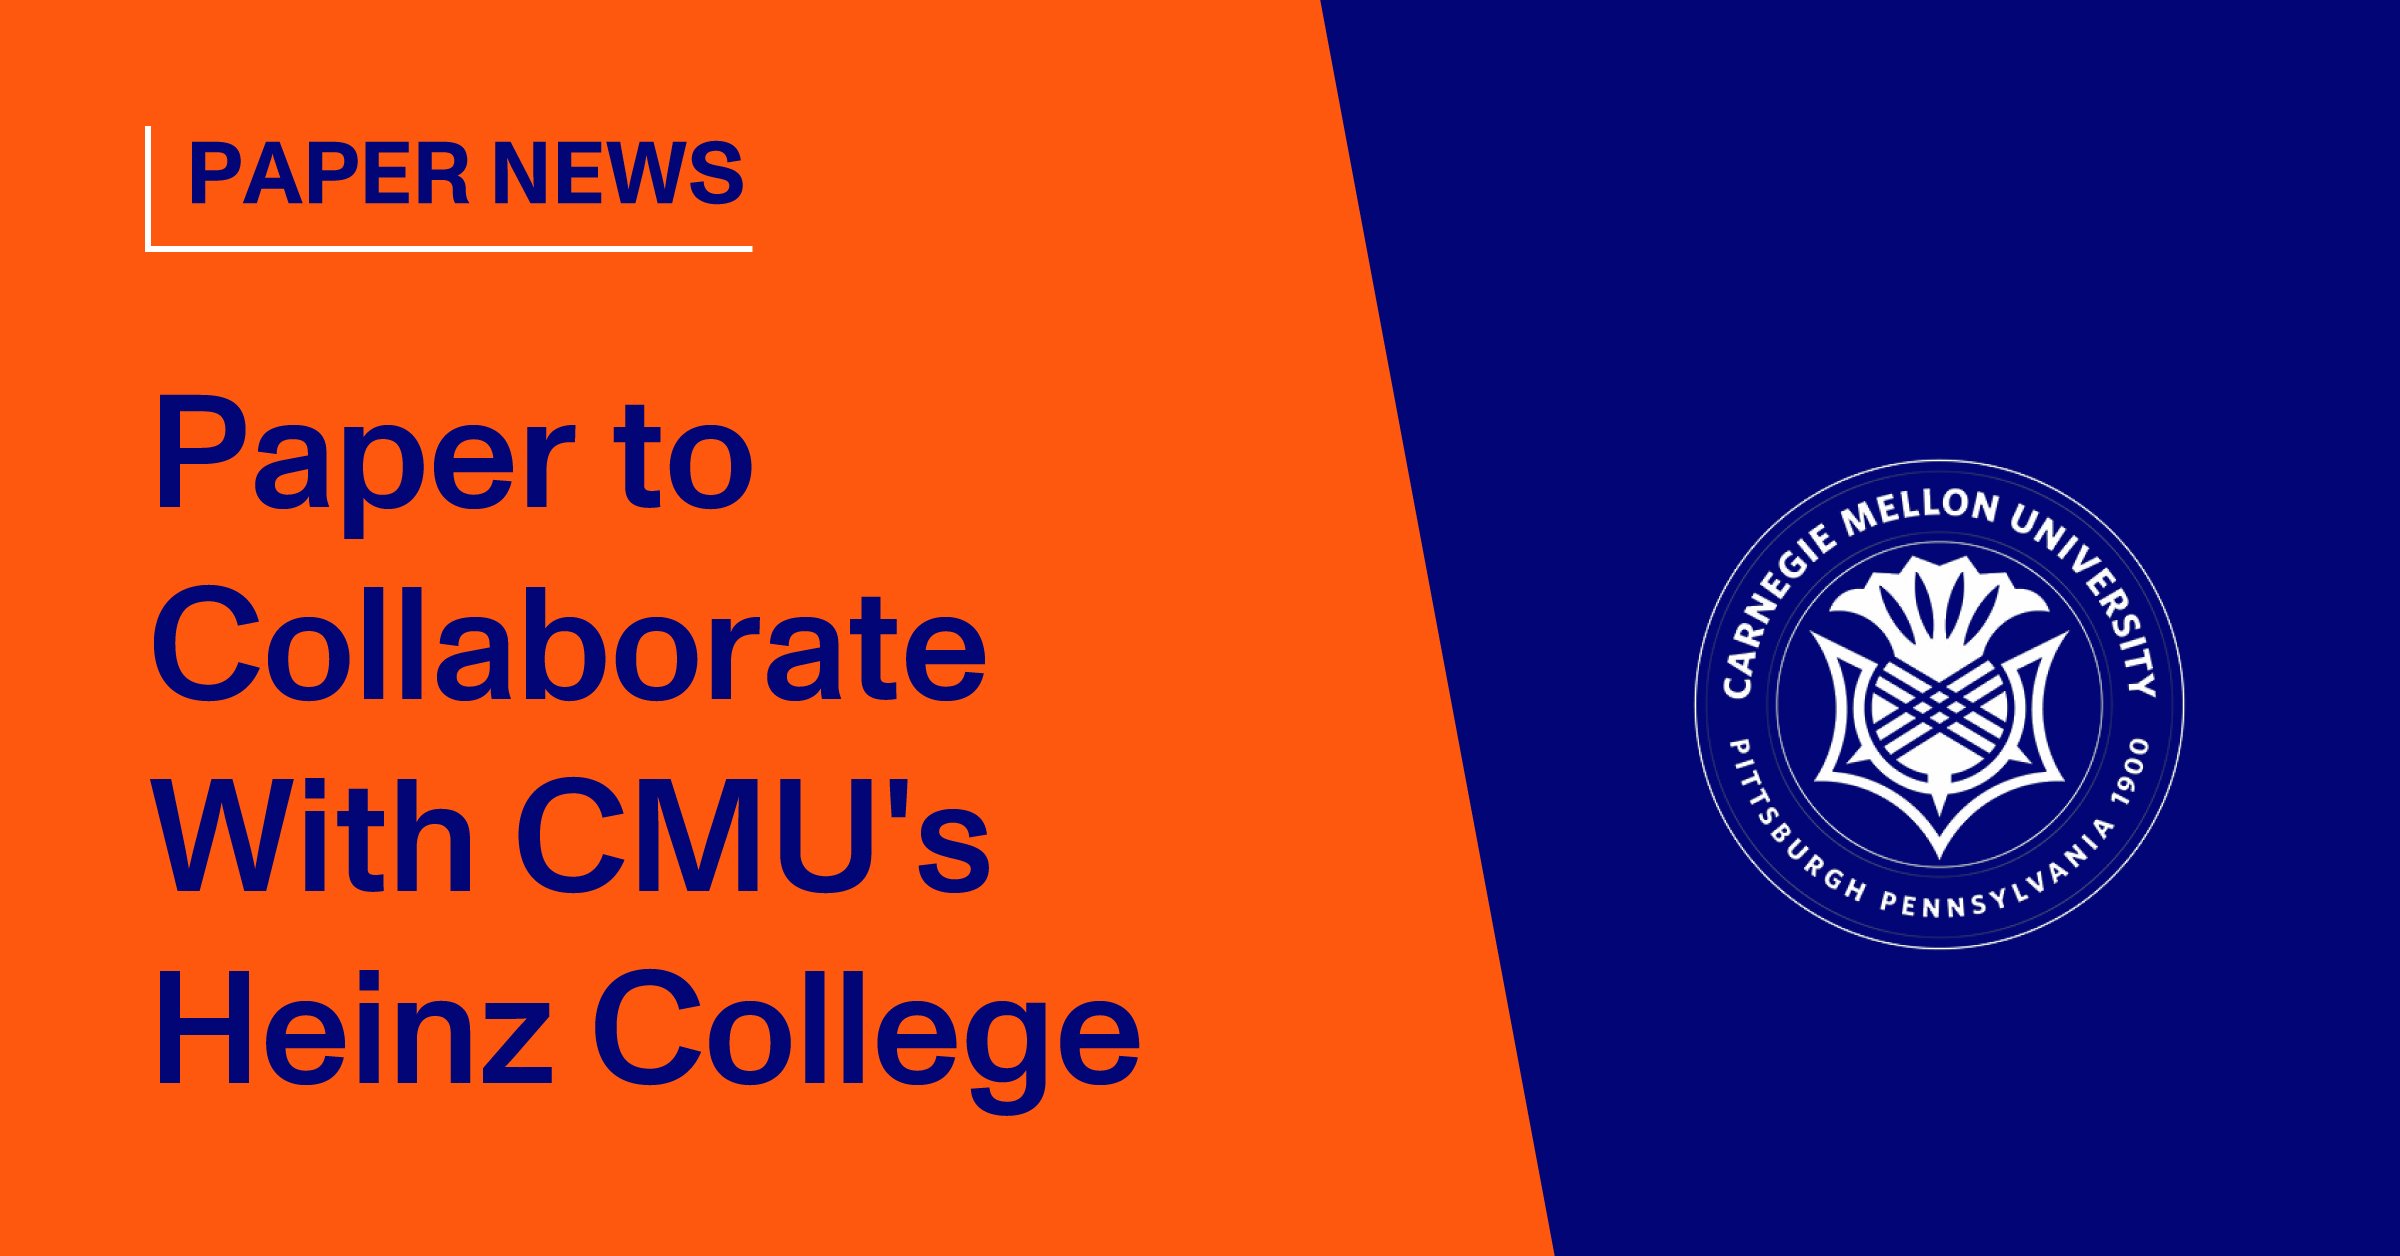 Paper to Collaborate With CMU's Heinz College